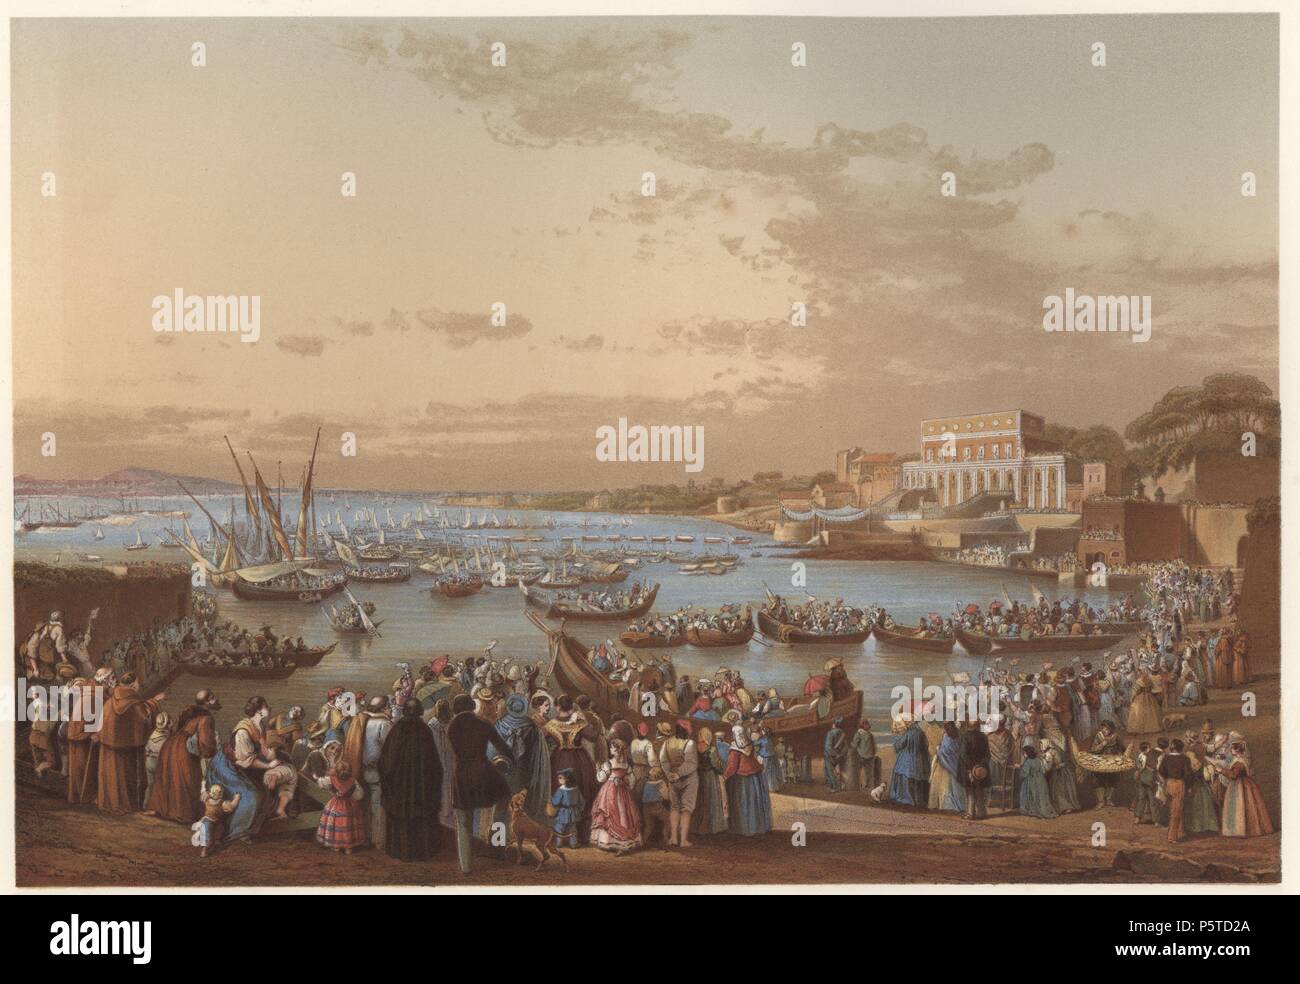 Giovanni Maria Ferretti Sollazzi (1792-1878). Pius IX, Pope of Rome. Convened the First Vatican Ecumenical Council, in 1869. Departure from the port of Gaeta to Naples. Stock Photo